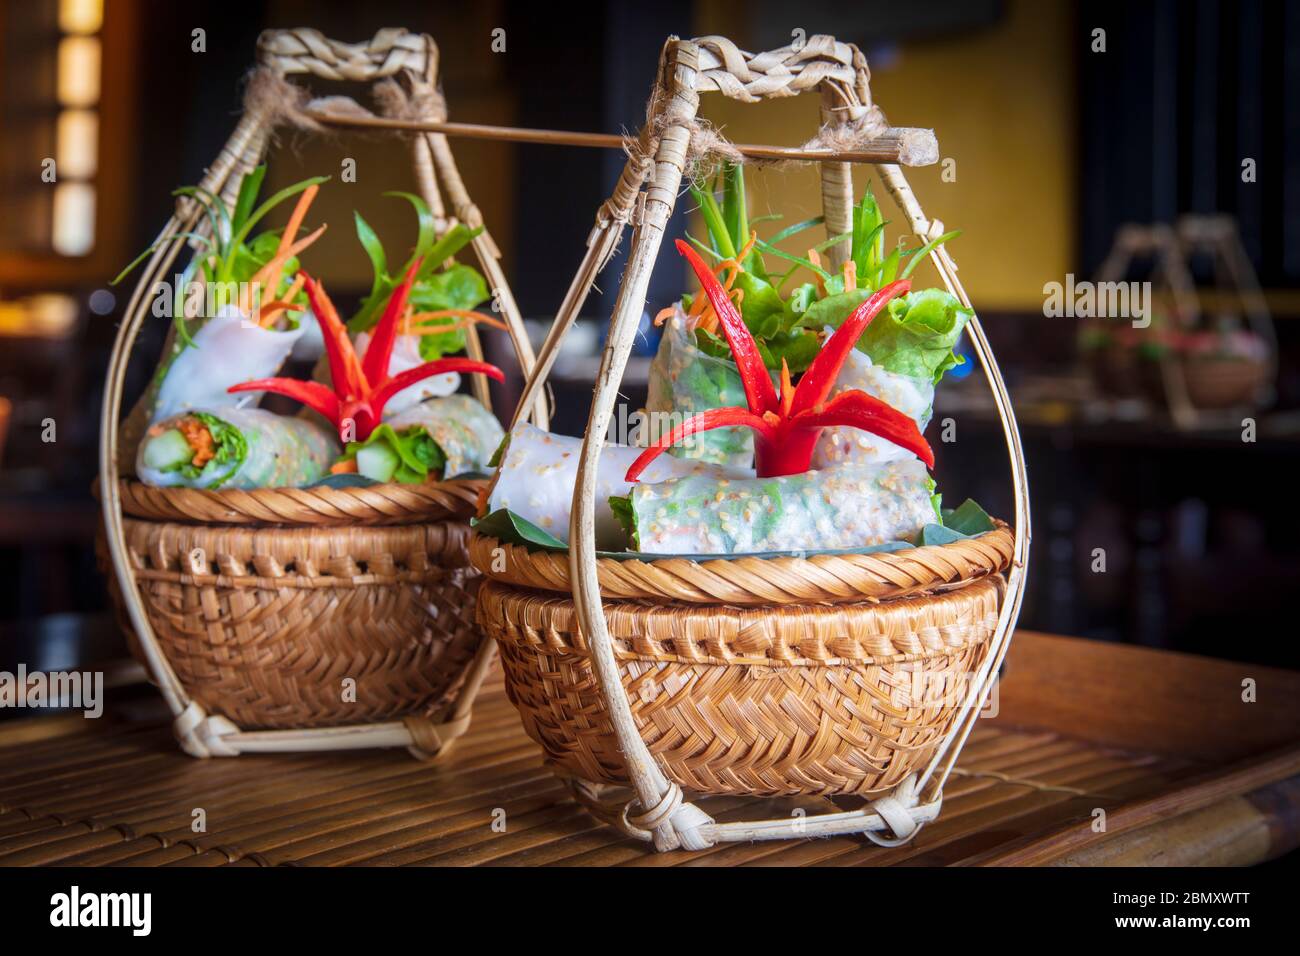 Vietnamese food served in traditional wicker baskets in a restaurant in Hoi An Stock Photo